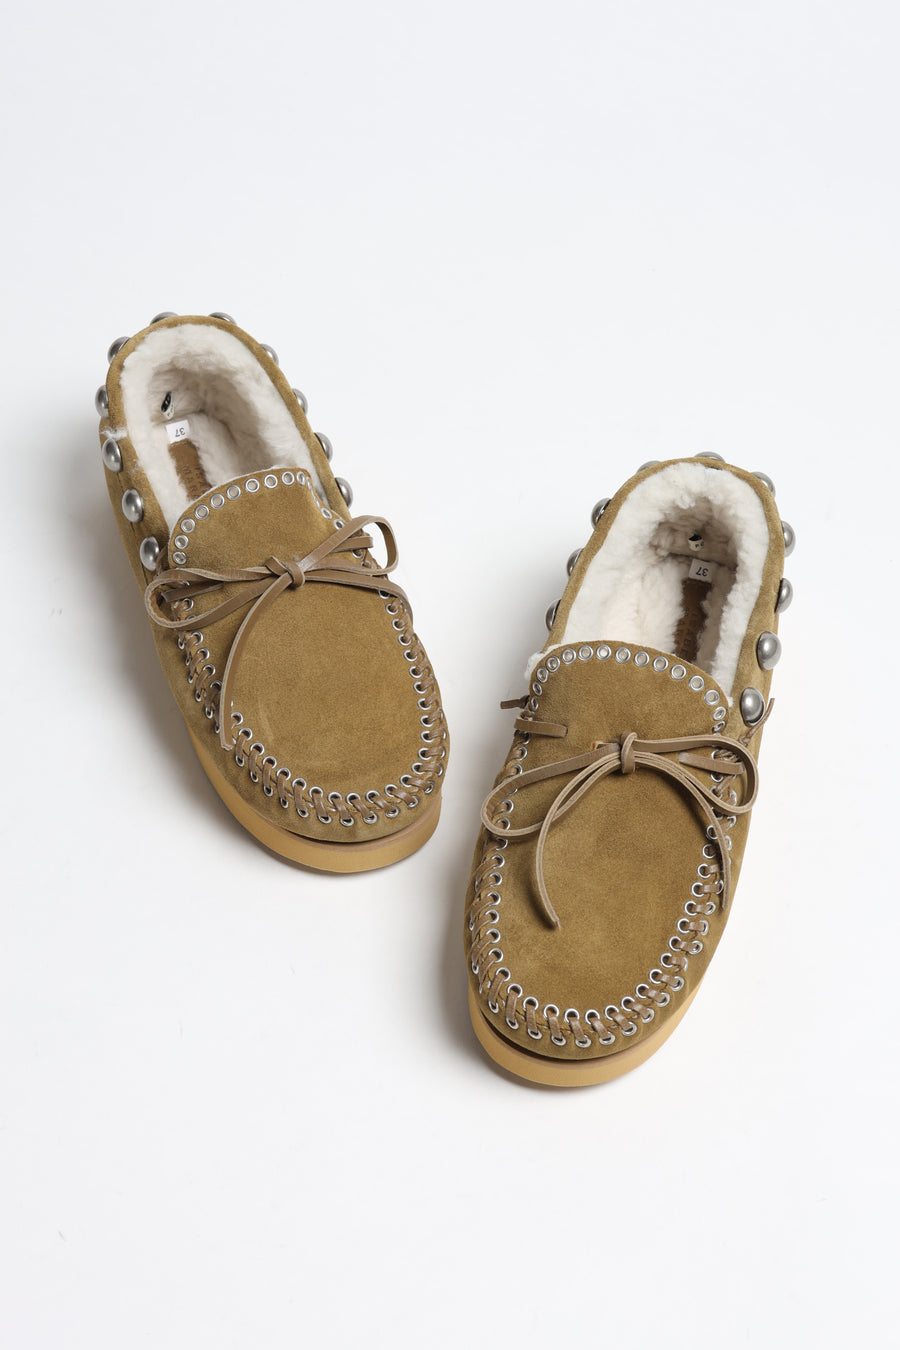 Loafer Forley in TaupeIsabel Marant - Anita Hass